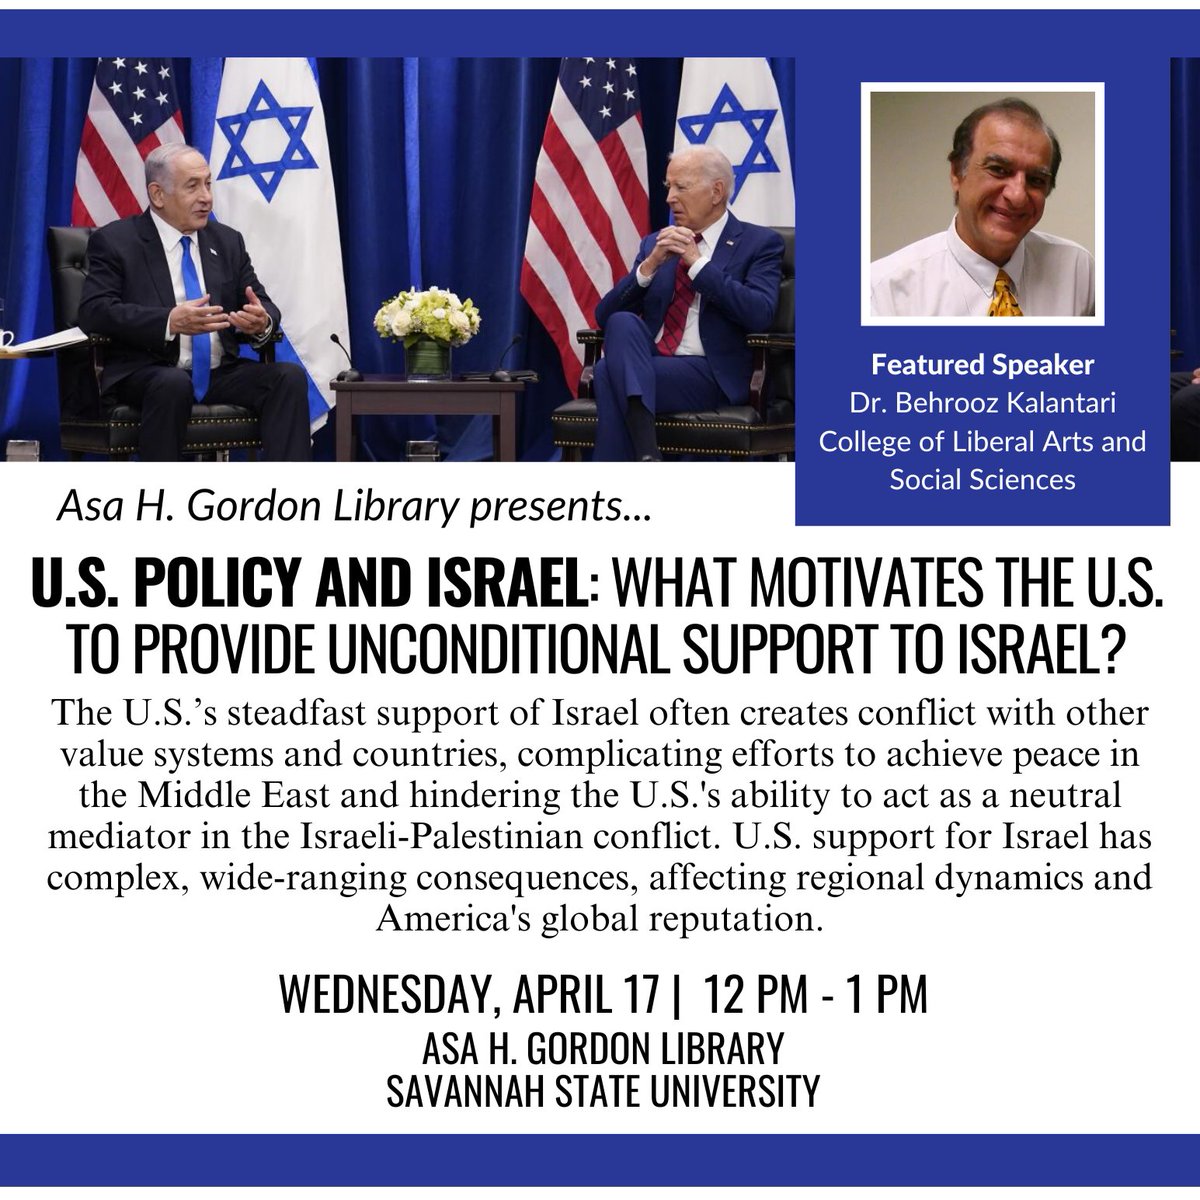 Next week,  join Dr. Kalantari for a discussion of  the United States’ continued support of Israel. What historical ties,  regional concerns, and political interests motivate this? How has the conflict in Palestine affected  it?

#savannahstate #savannahstateuniversity